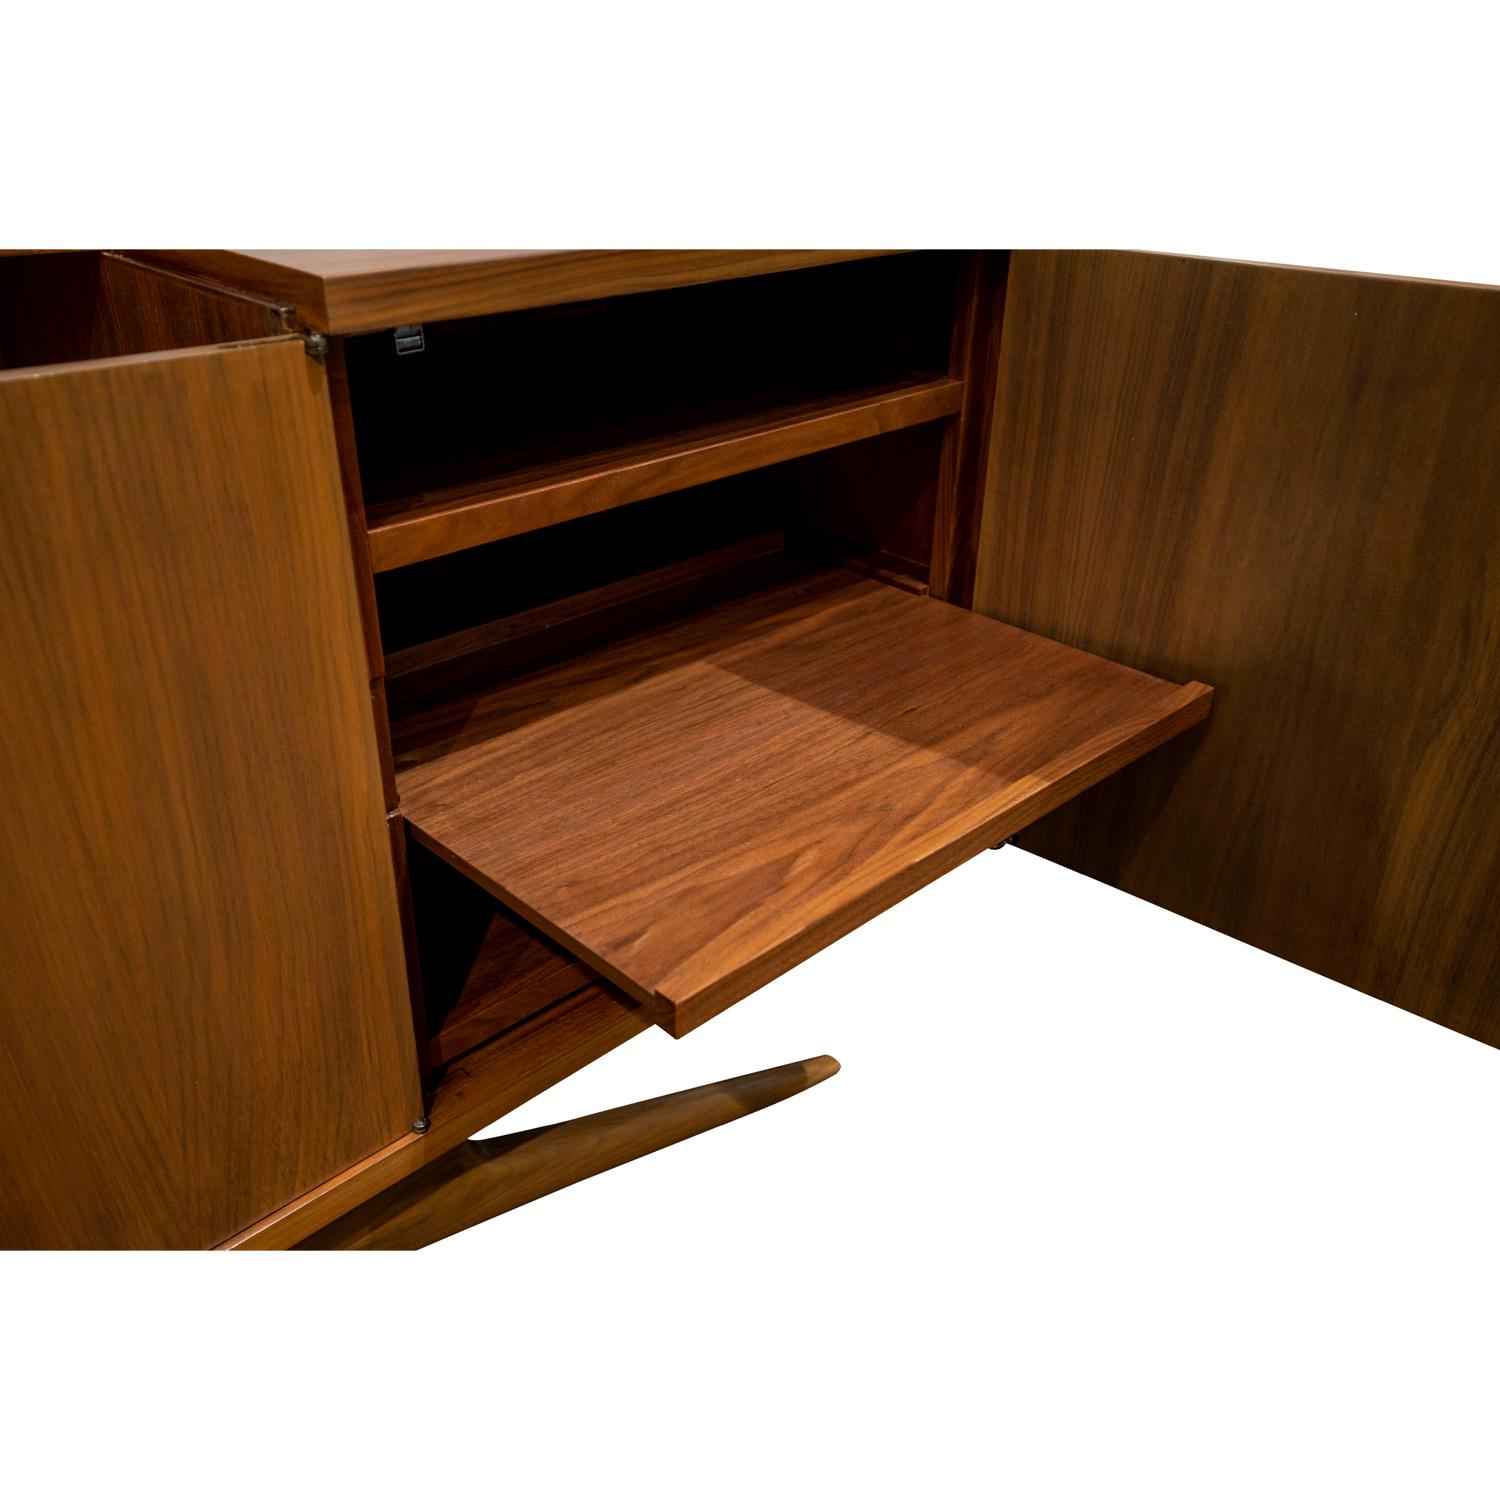 Vladimir Kagan One-of-a-Kind Credenza with Carved Center Panels 1940s (Signed) For Sale 1